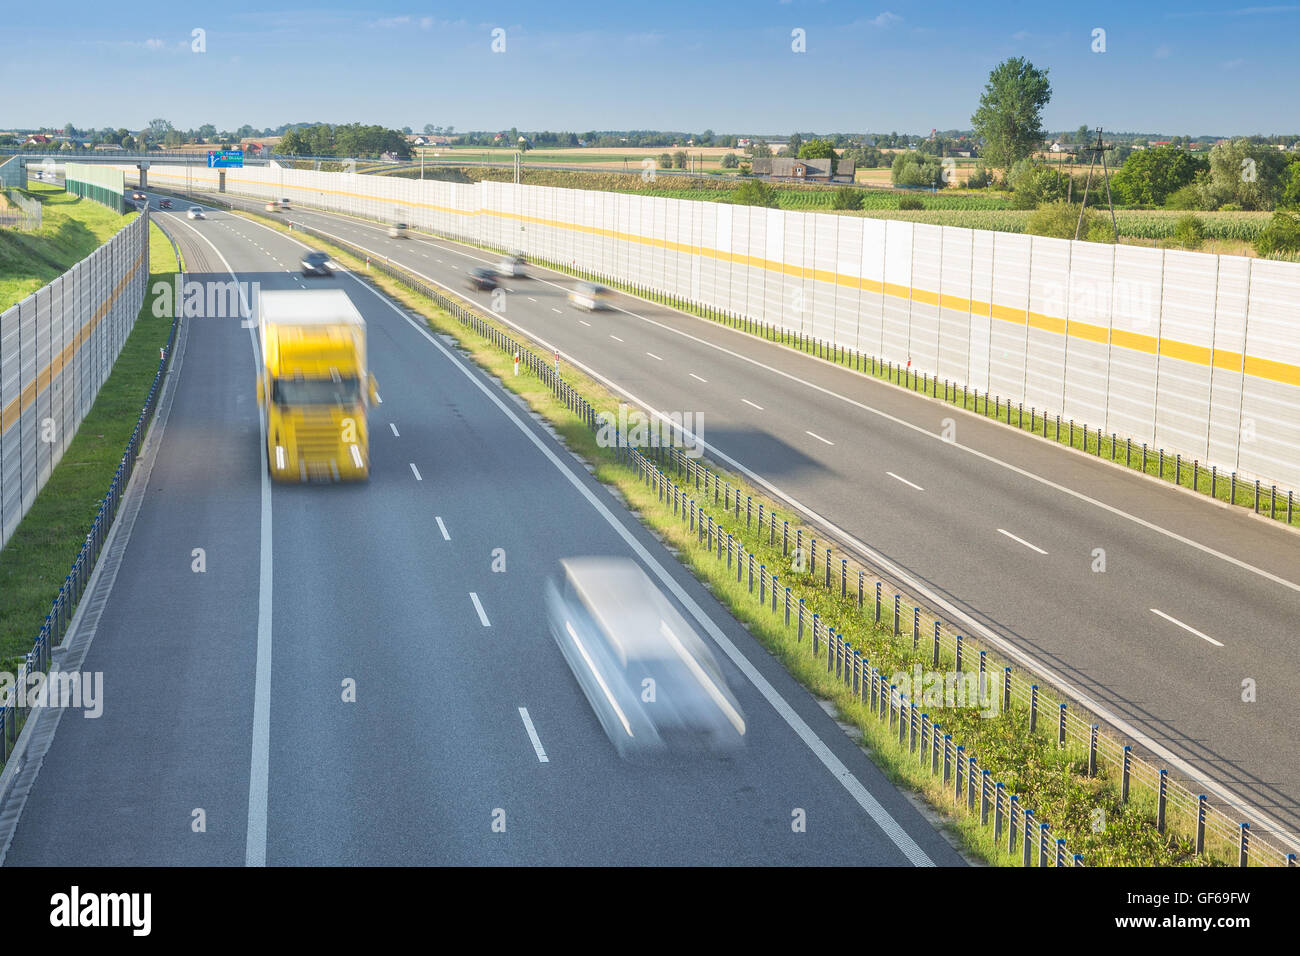 Noise barriers by the highway in rural county Stock Photo